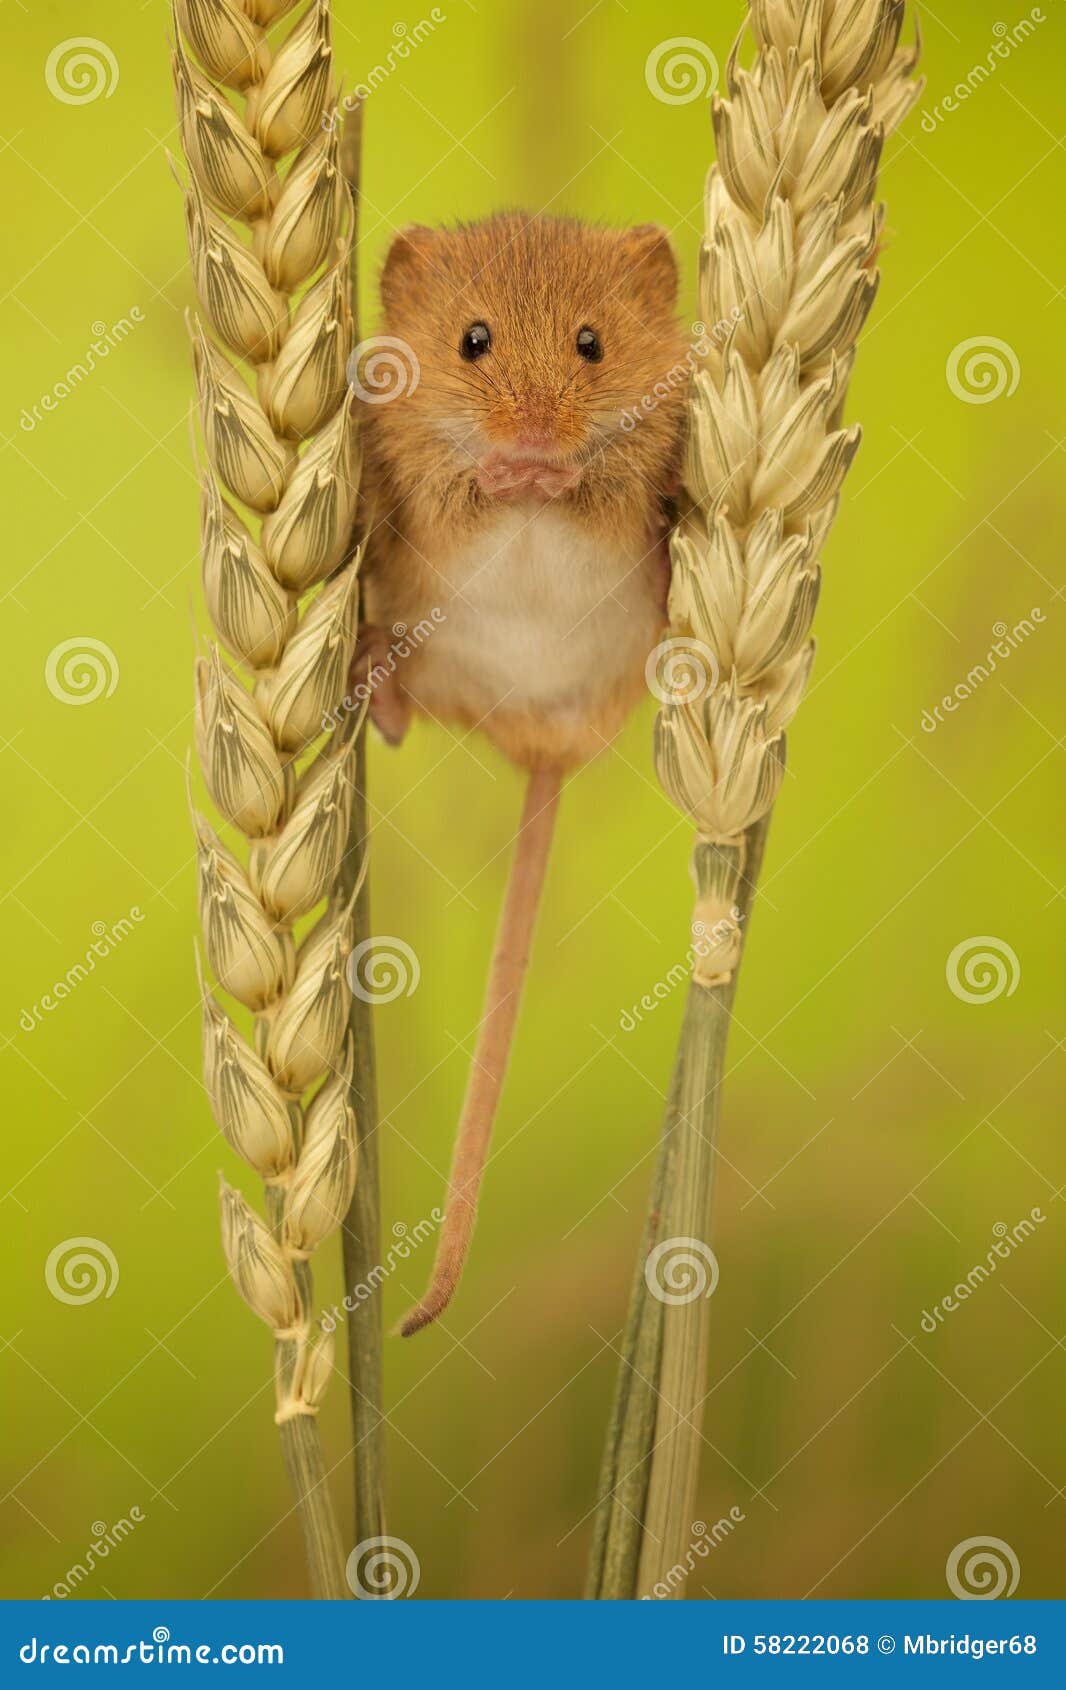 harvest mouse on wheat